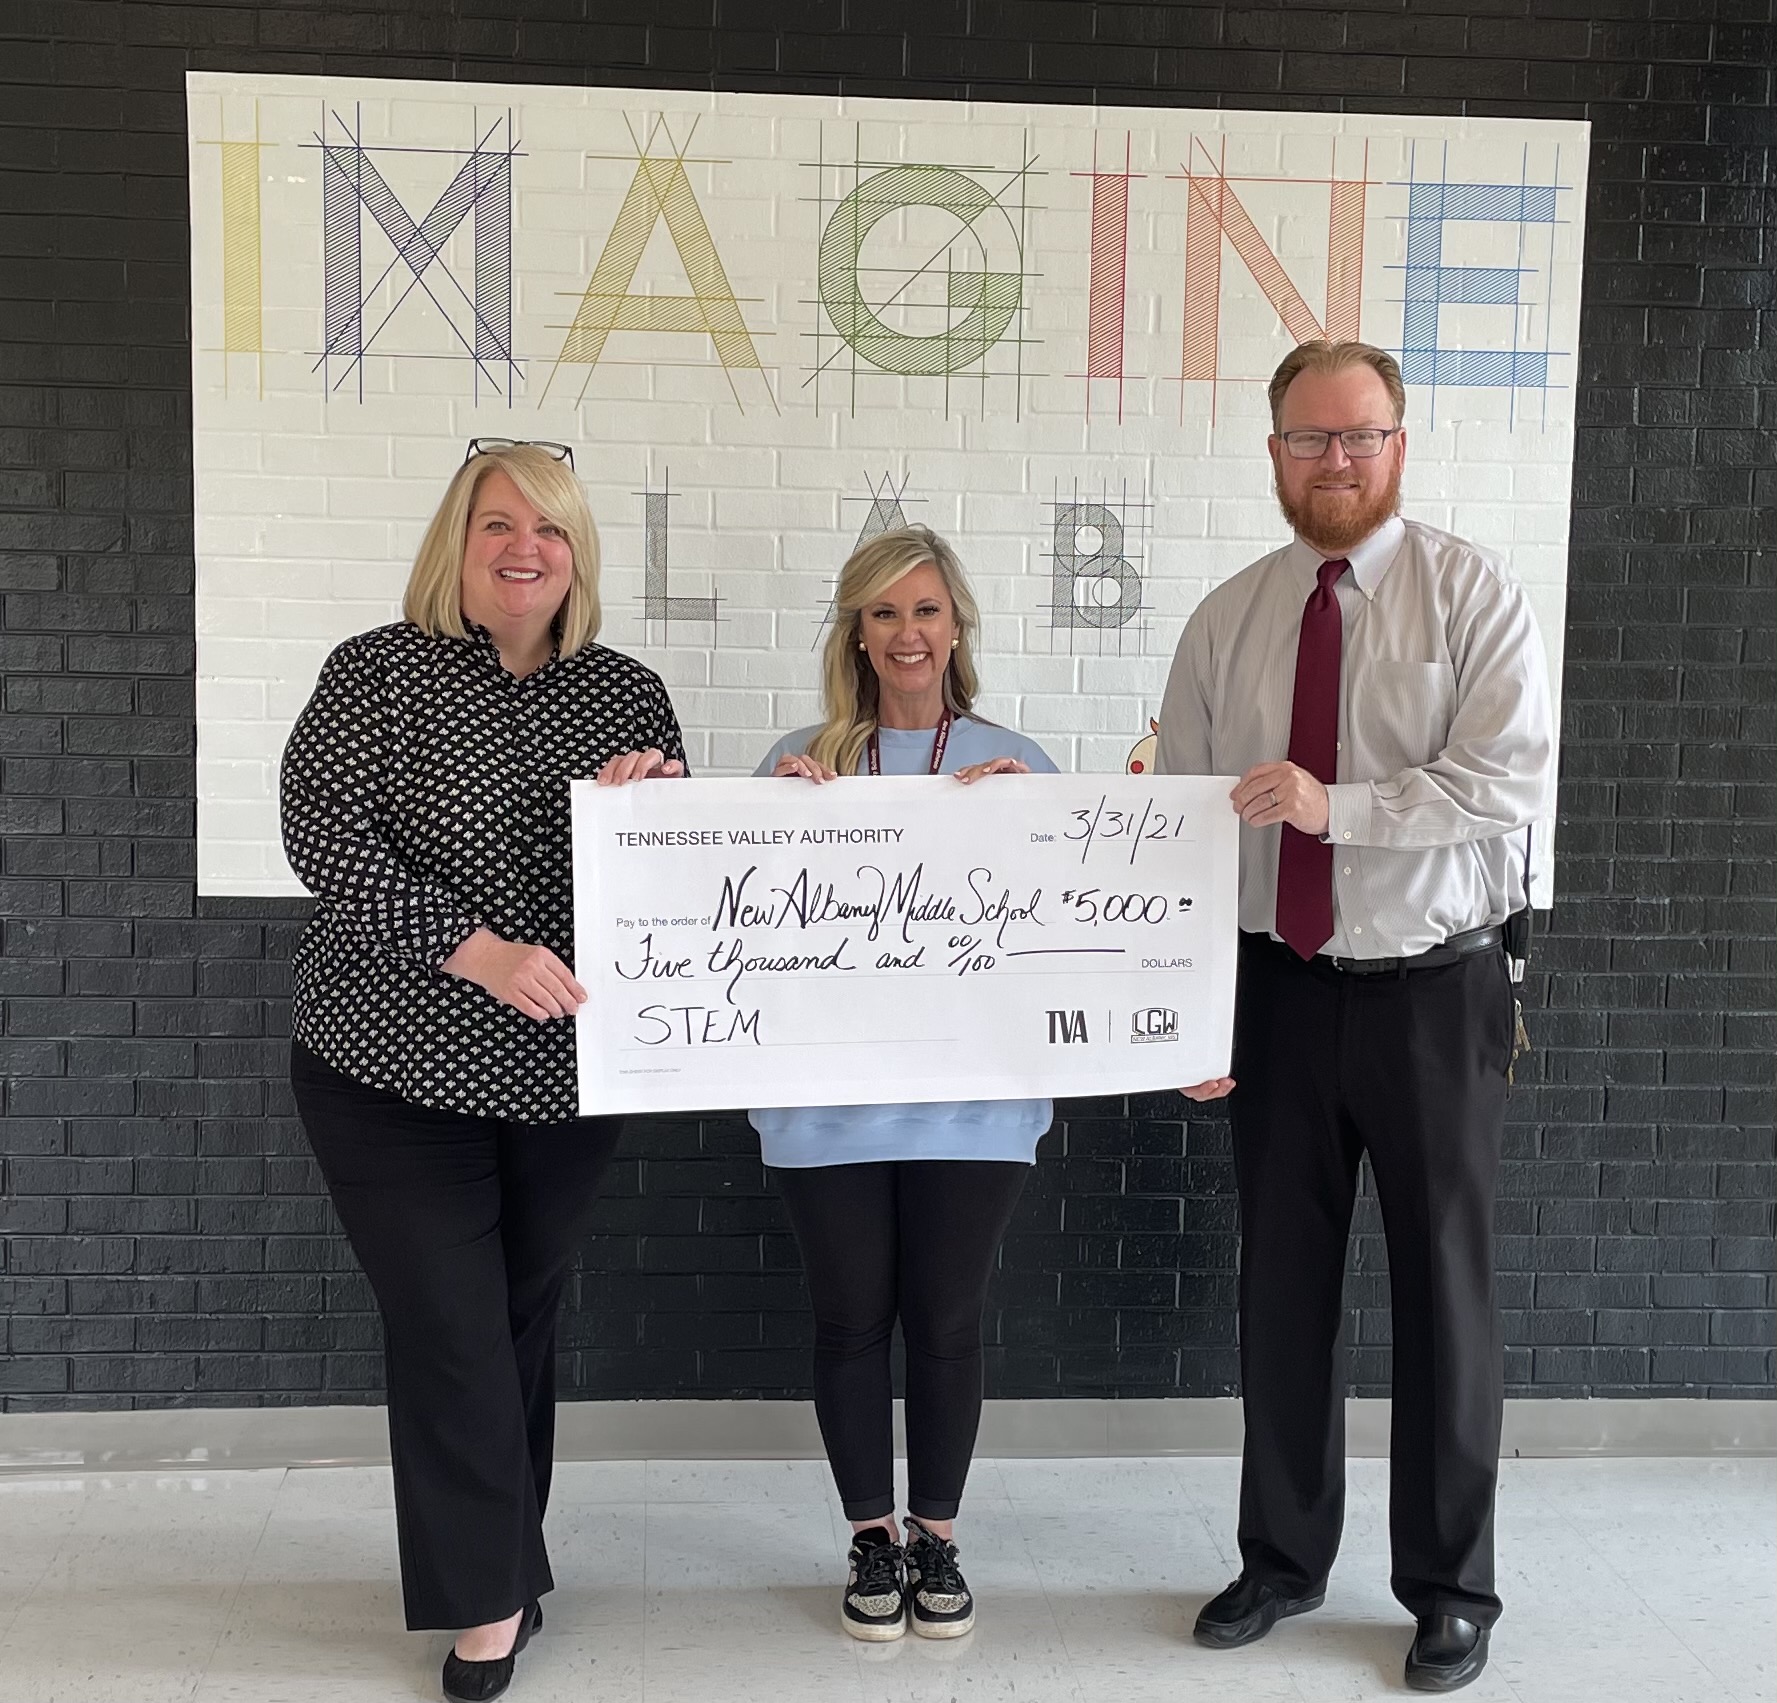 Pictured l-r: Amy Tate, TVA Government Relations Manager; Sarah Garrett, Imagine Lab Coordinator; and Paul Henry, NAMS Principal (check presentation)